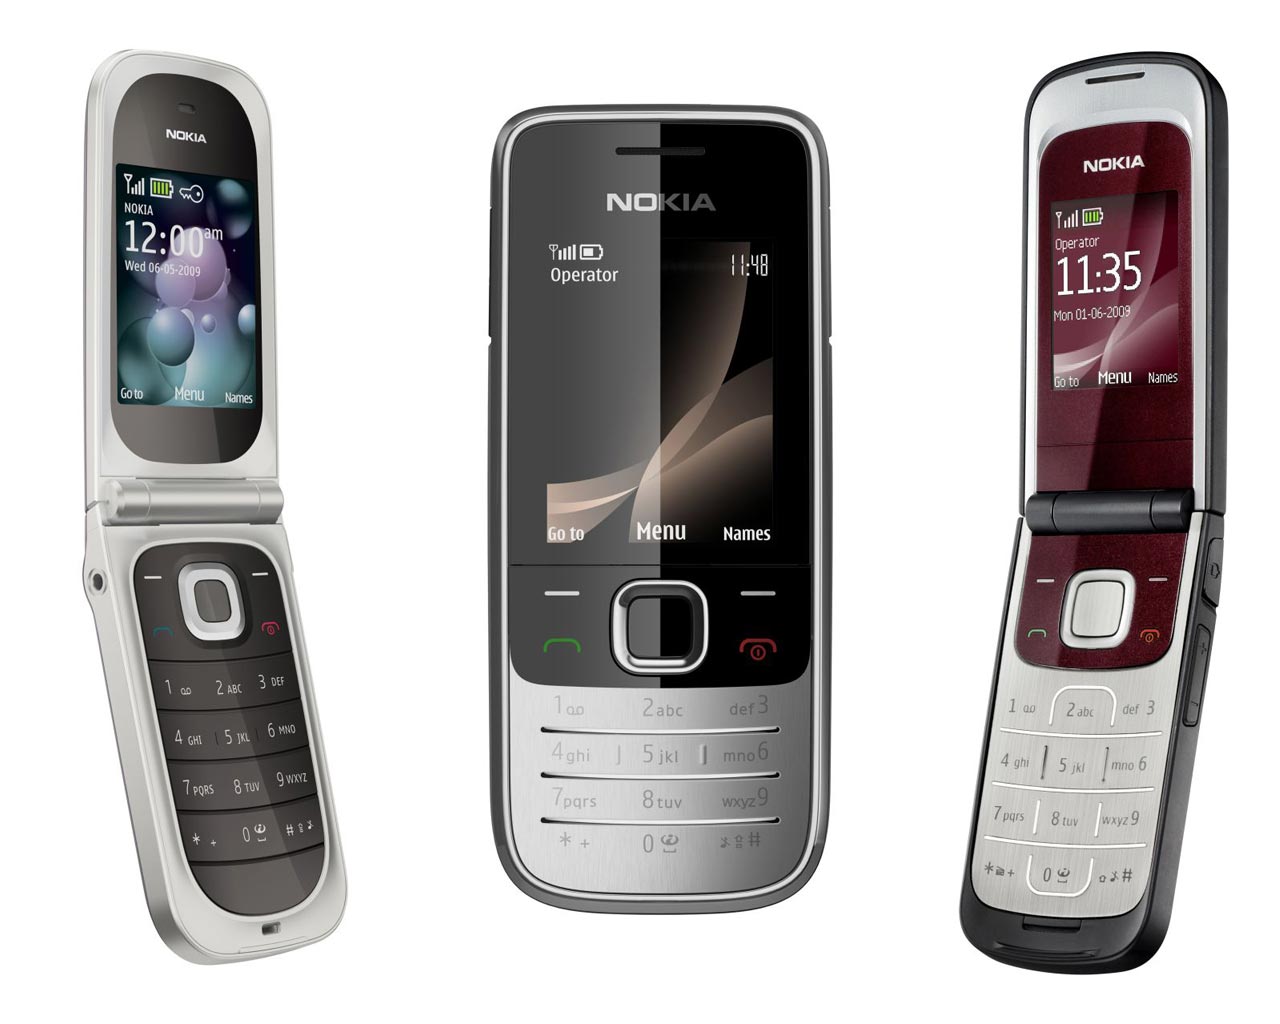 the Nokia 7020 combines a